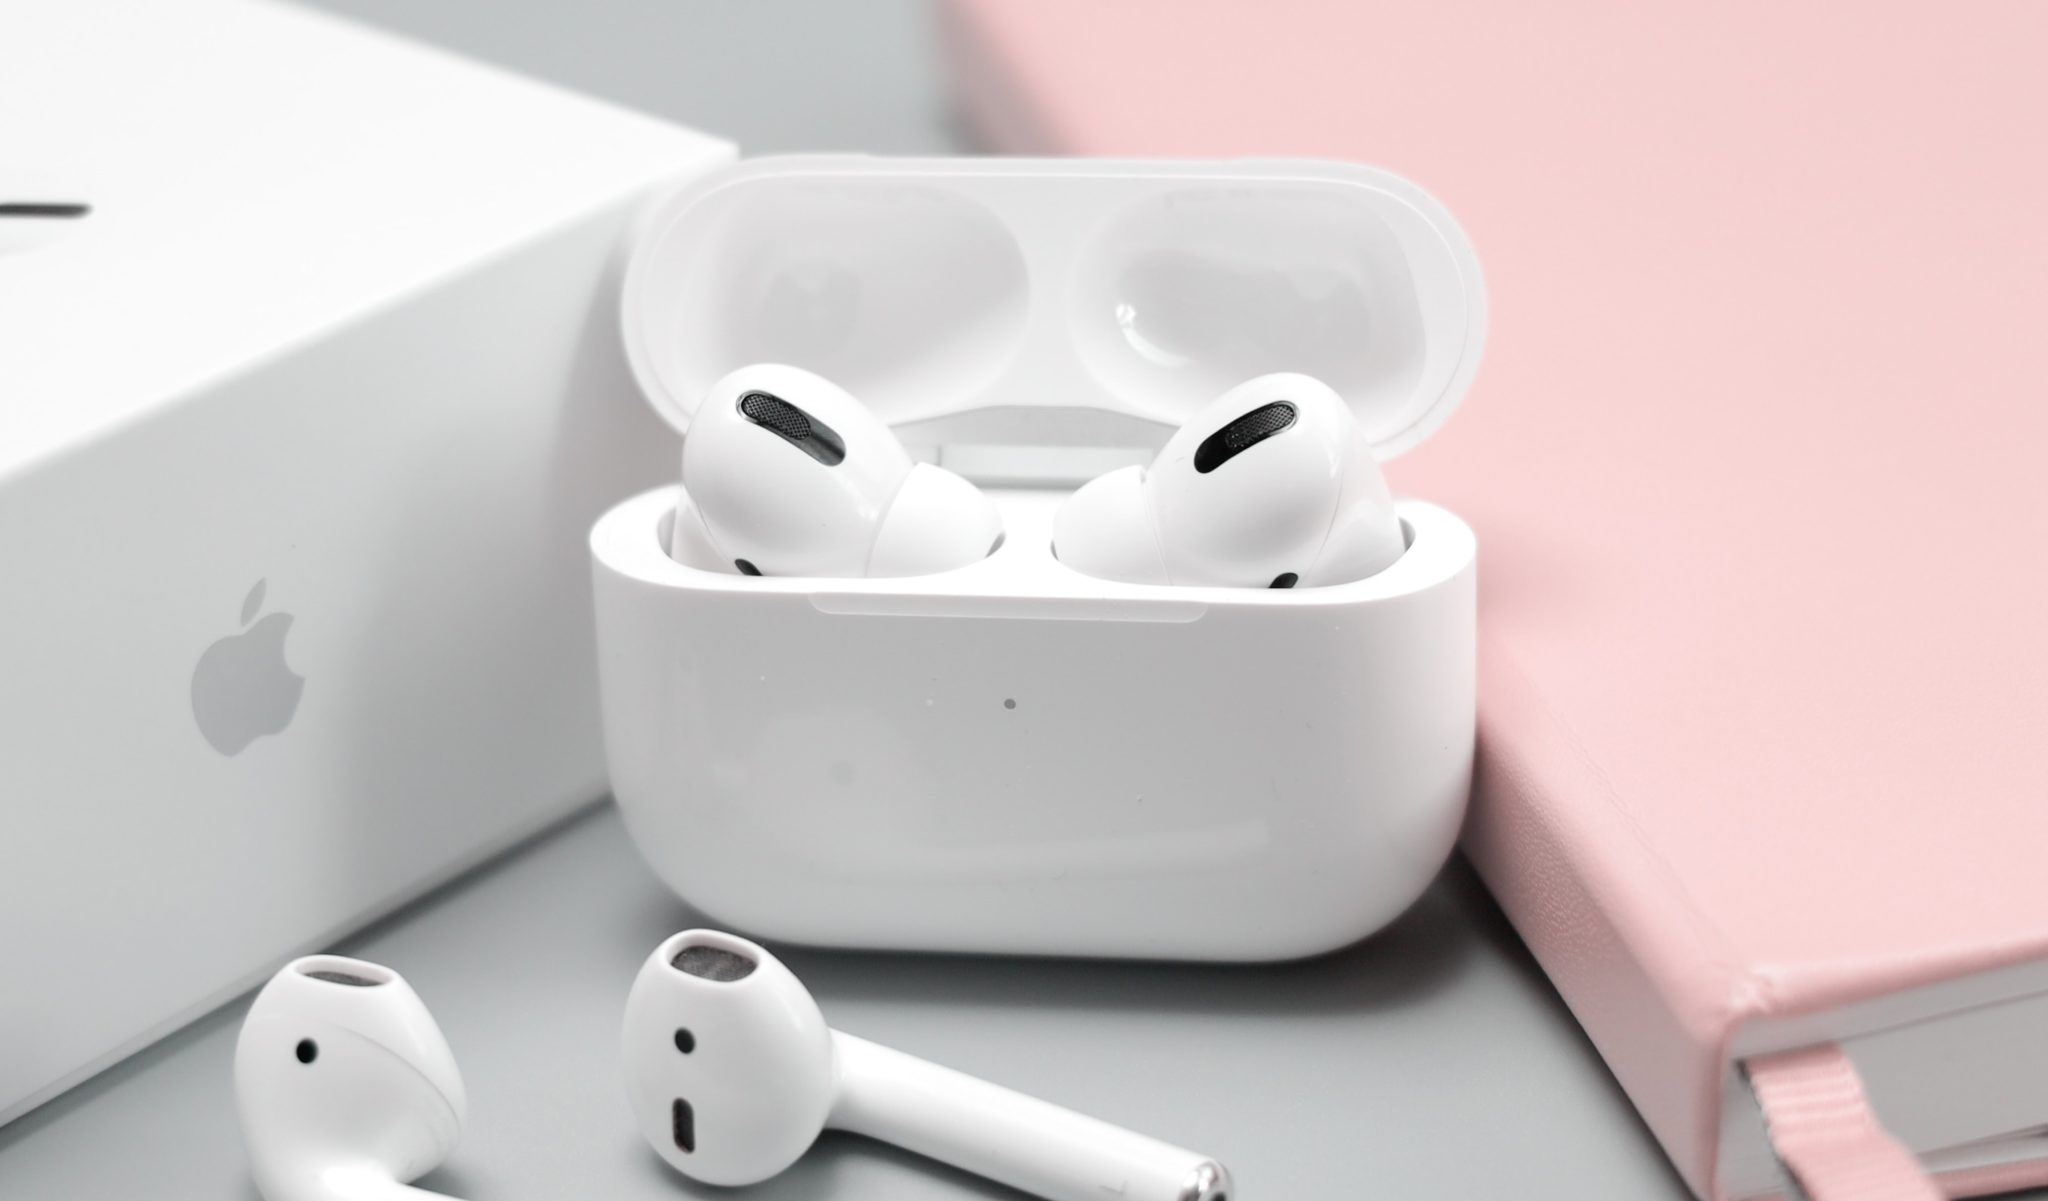 AirPods in case with Apple logo